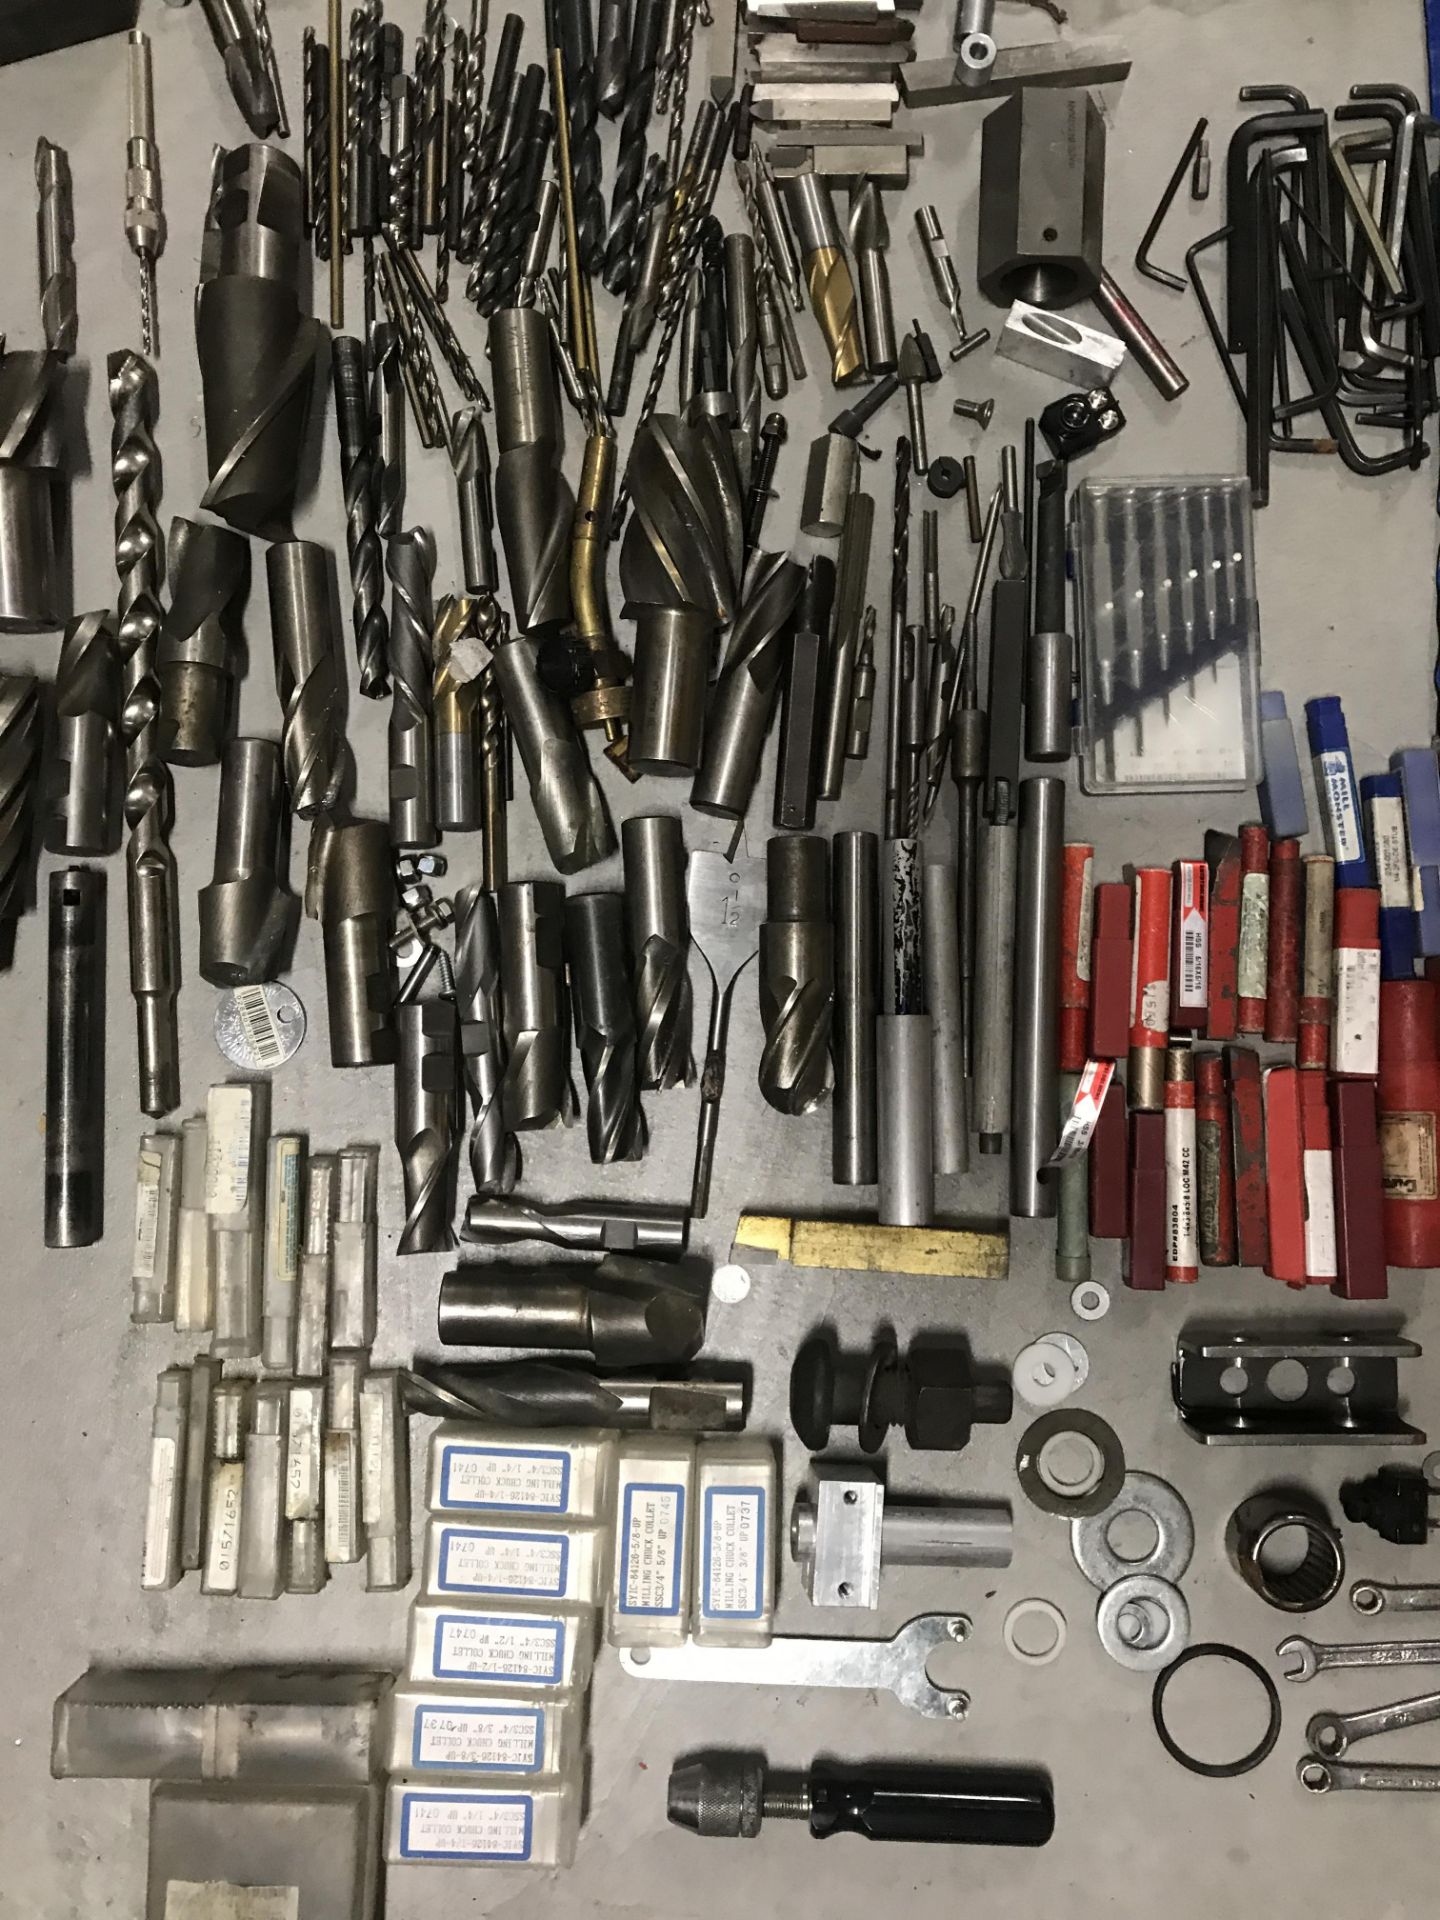 LOT OF ASSORTED TOOLING, DRILL HEADS, MISC DRILLING BORING TOOLS - Image 2 of 3